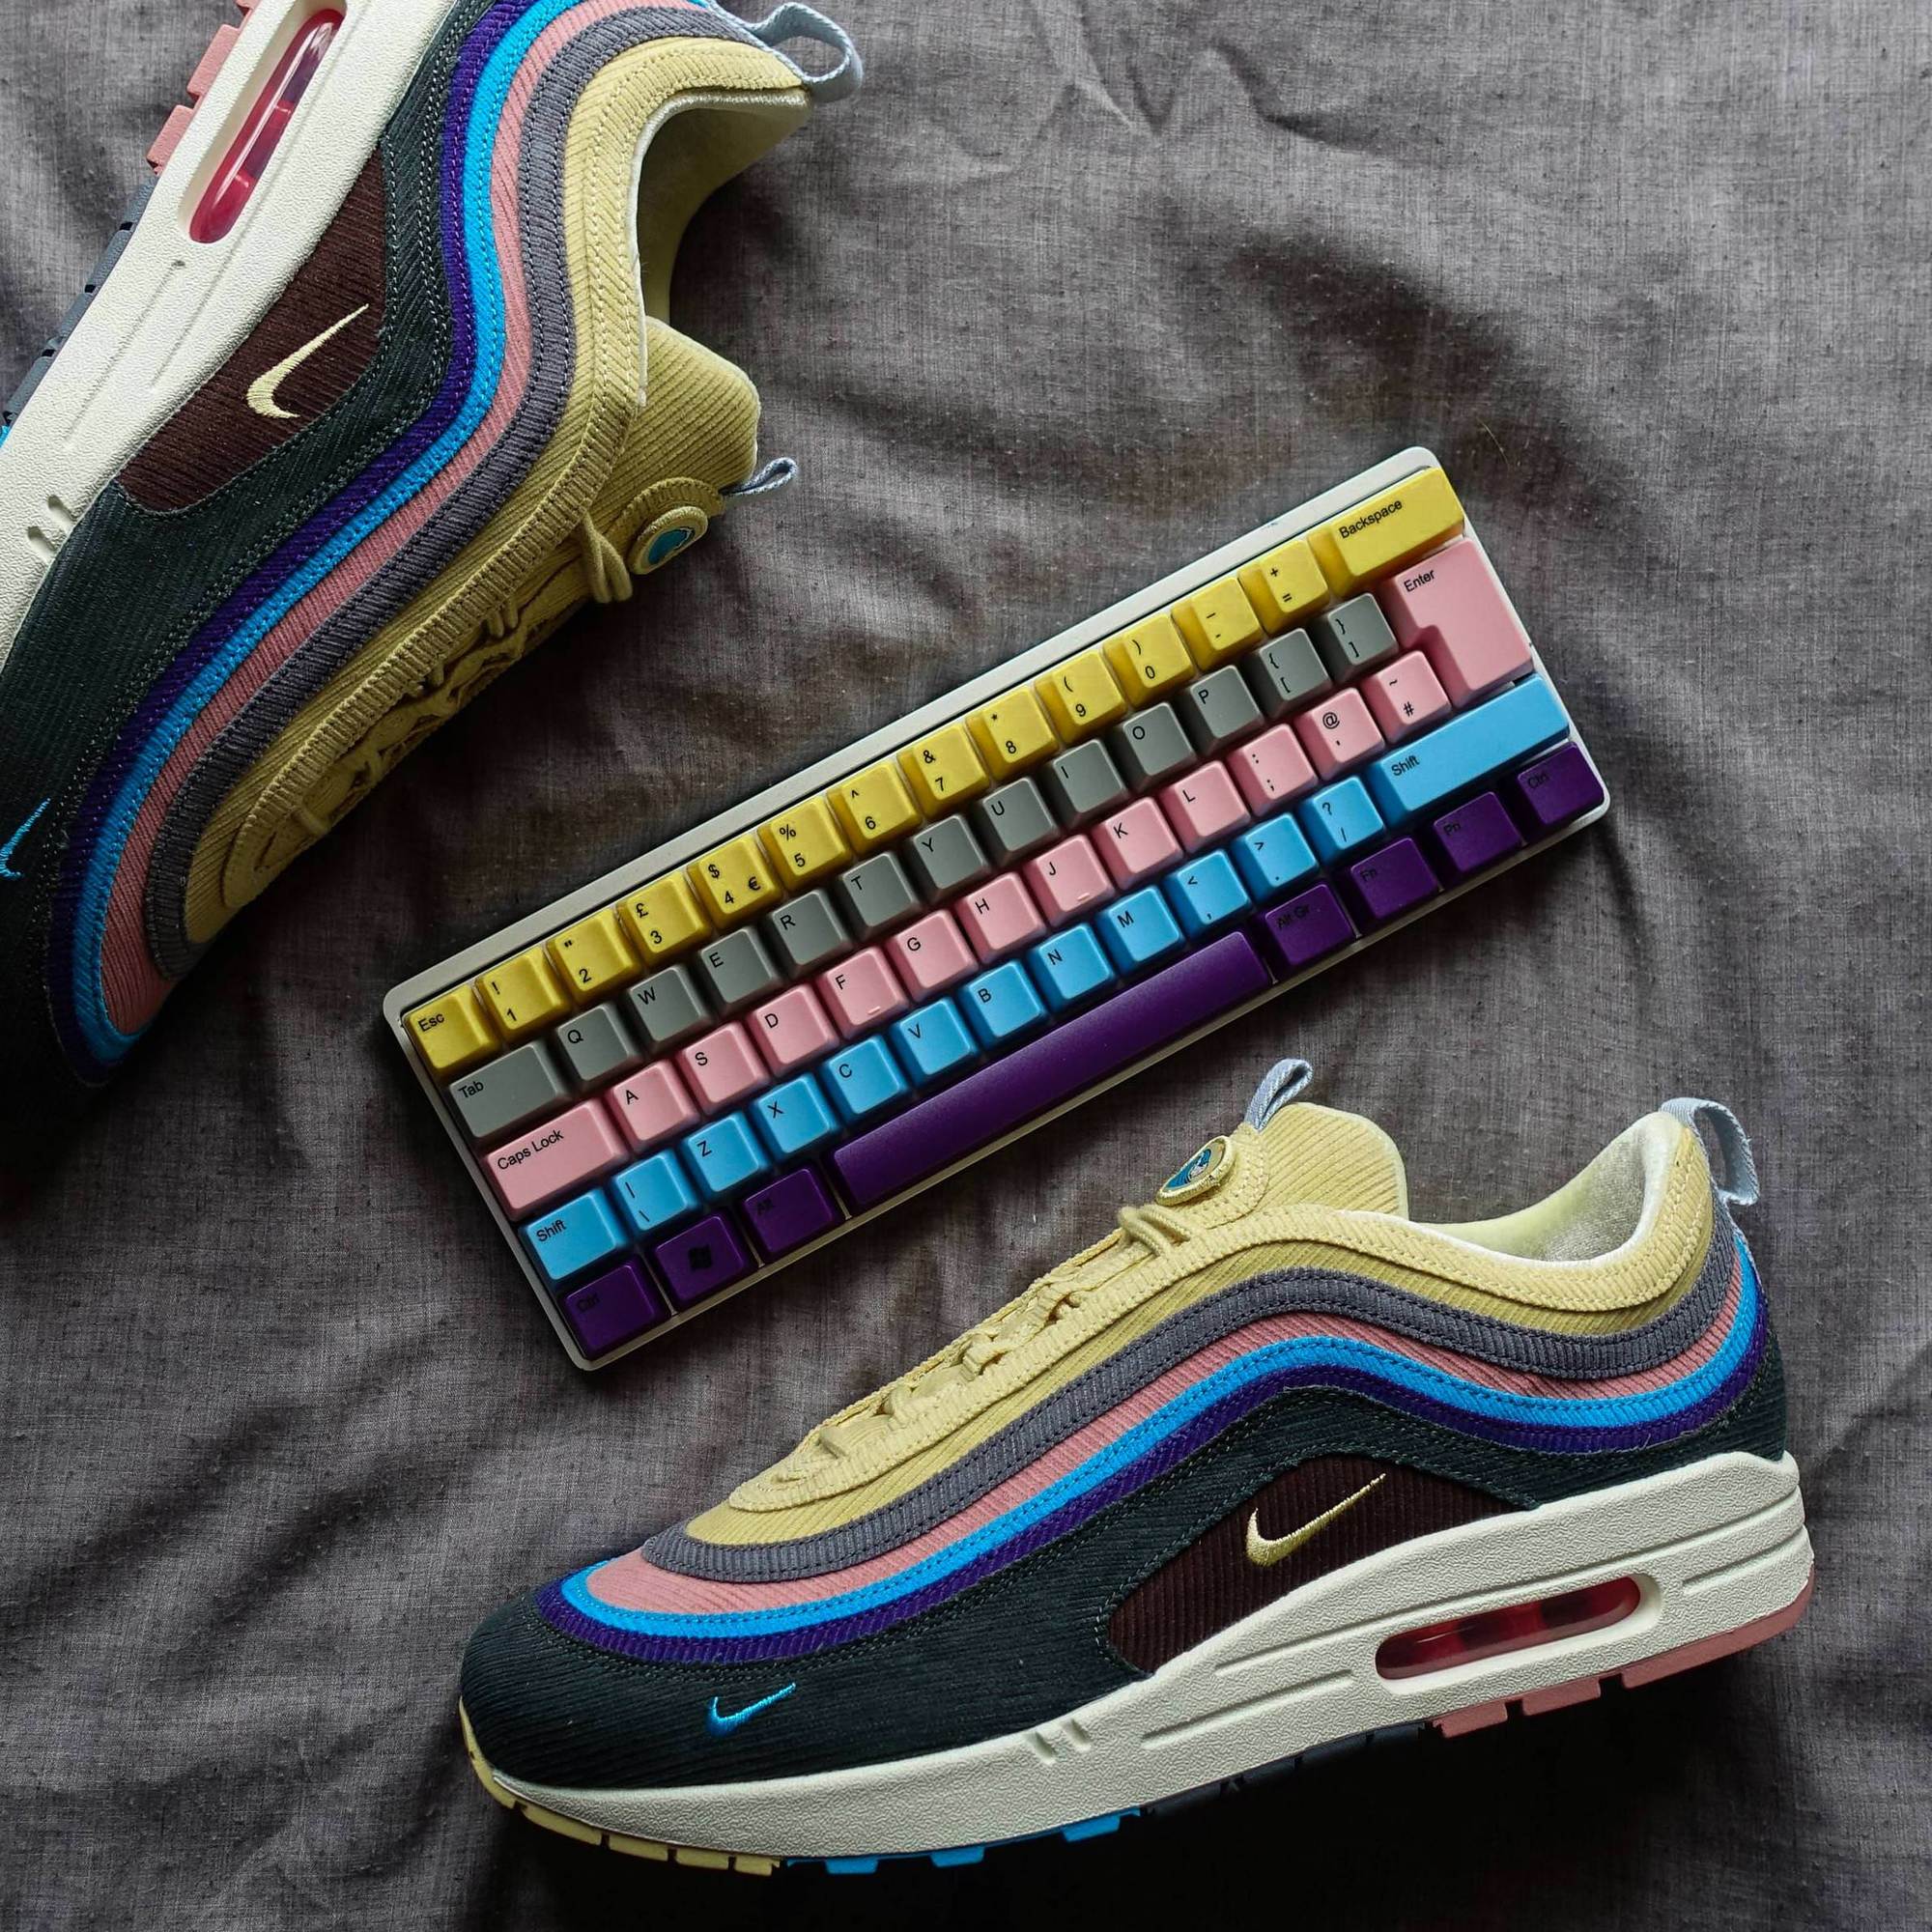 shoes and keyboard